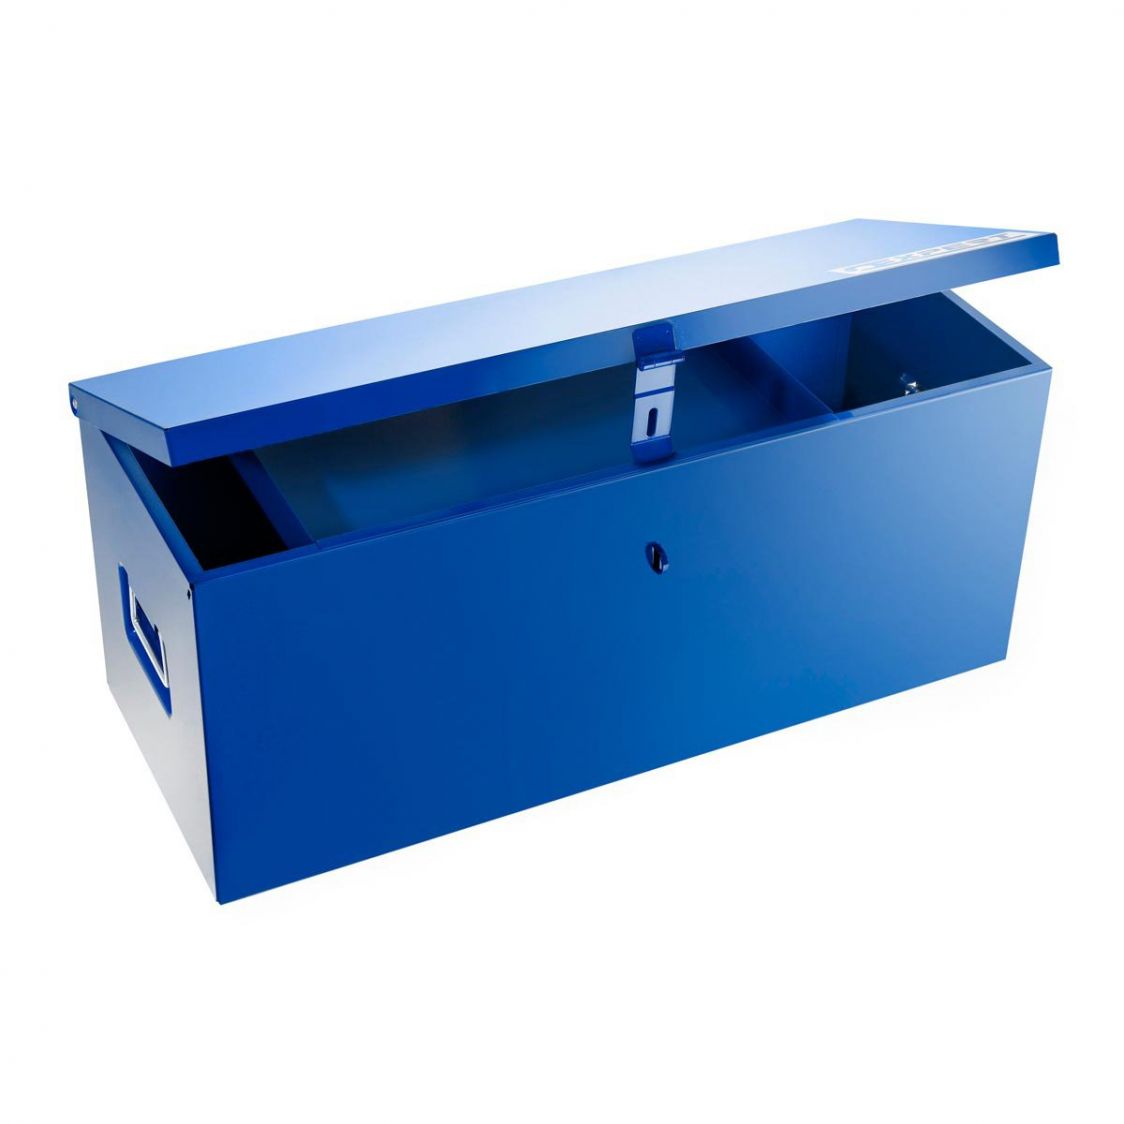 EXPERT by FACOM E010204 - 1000mm Worksite Tool Chest